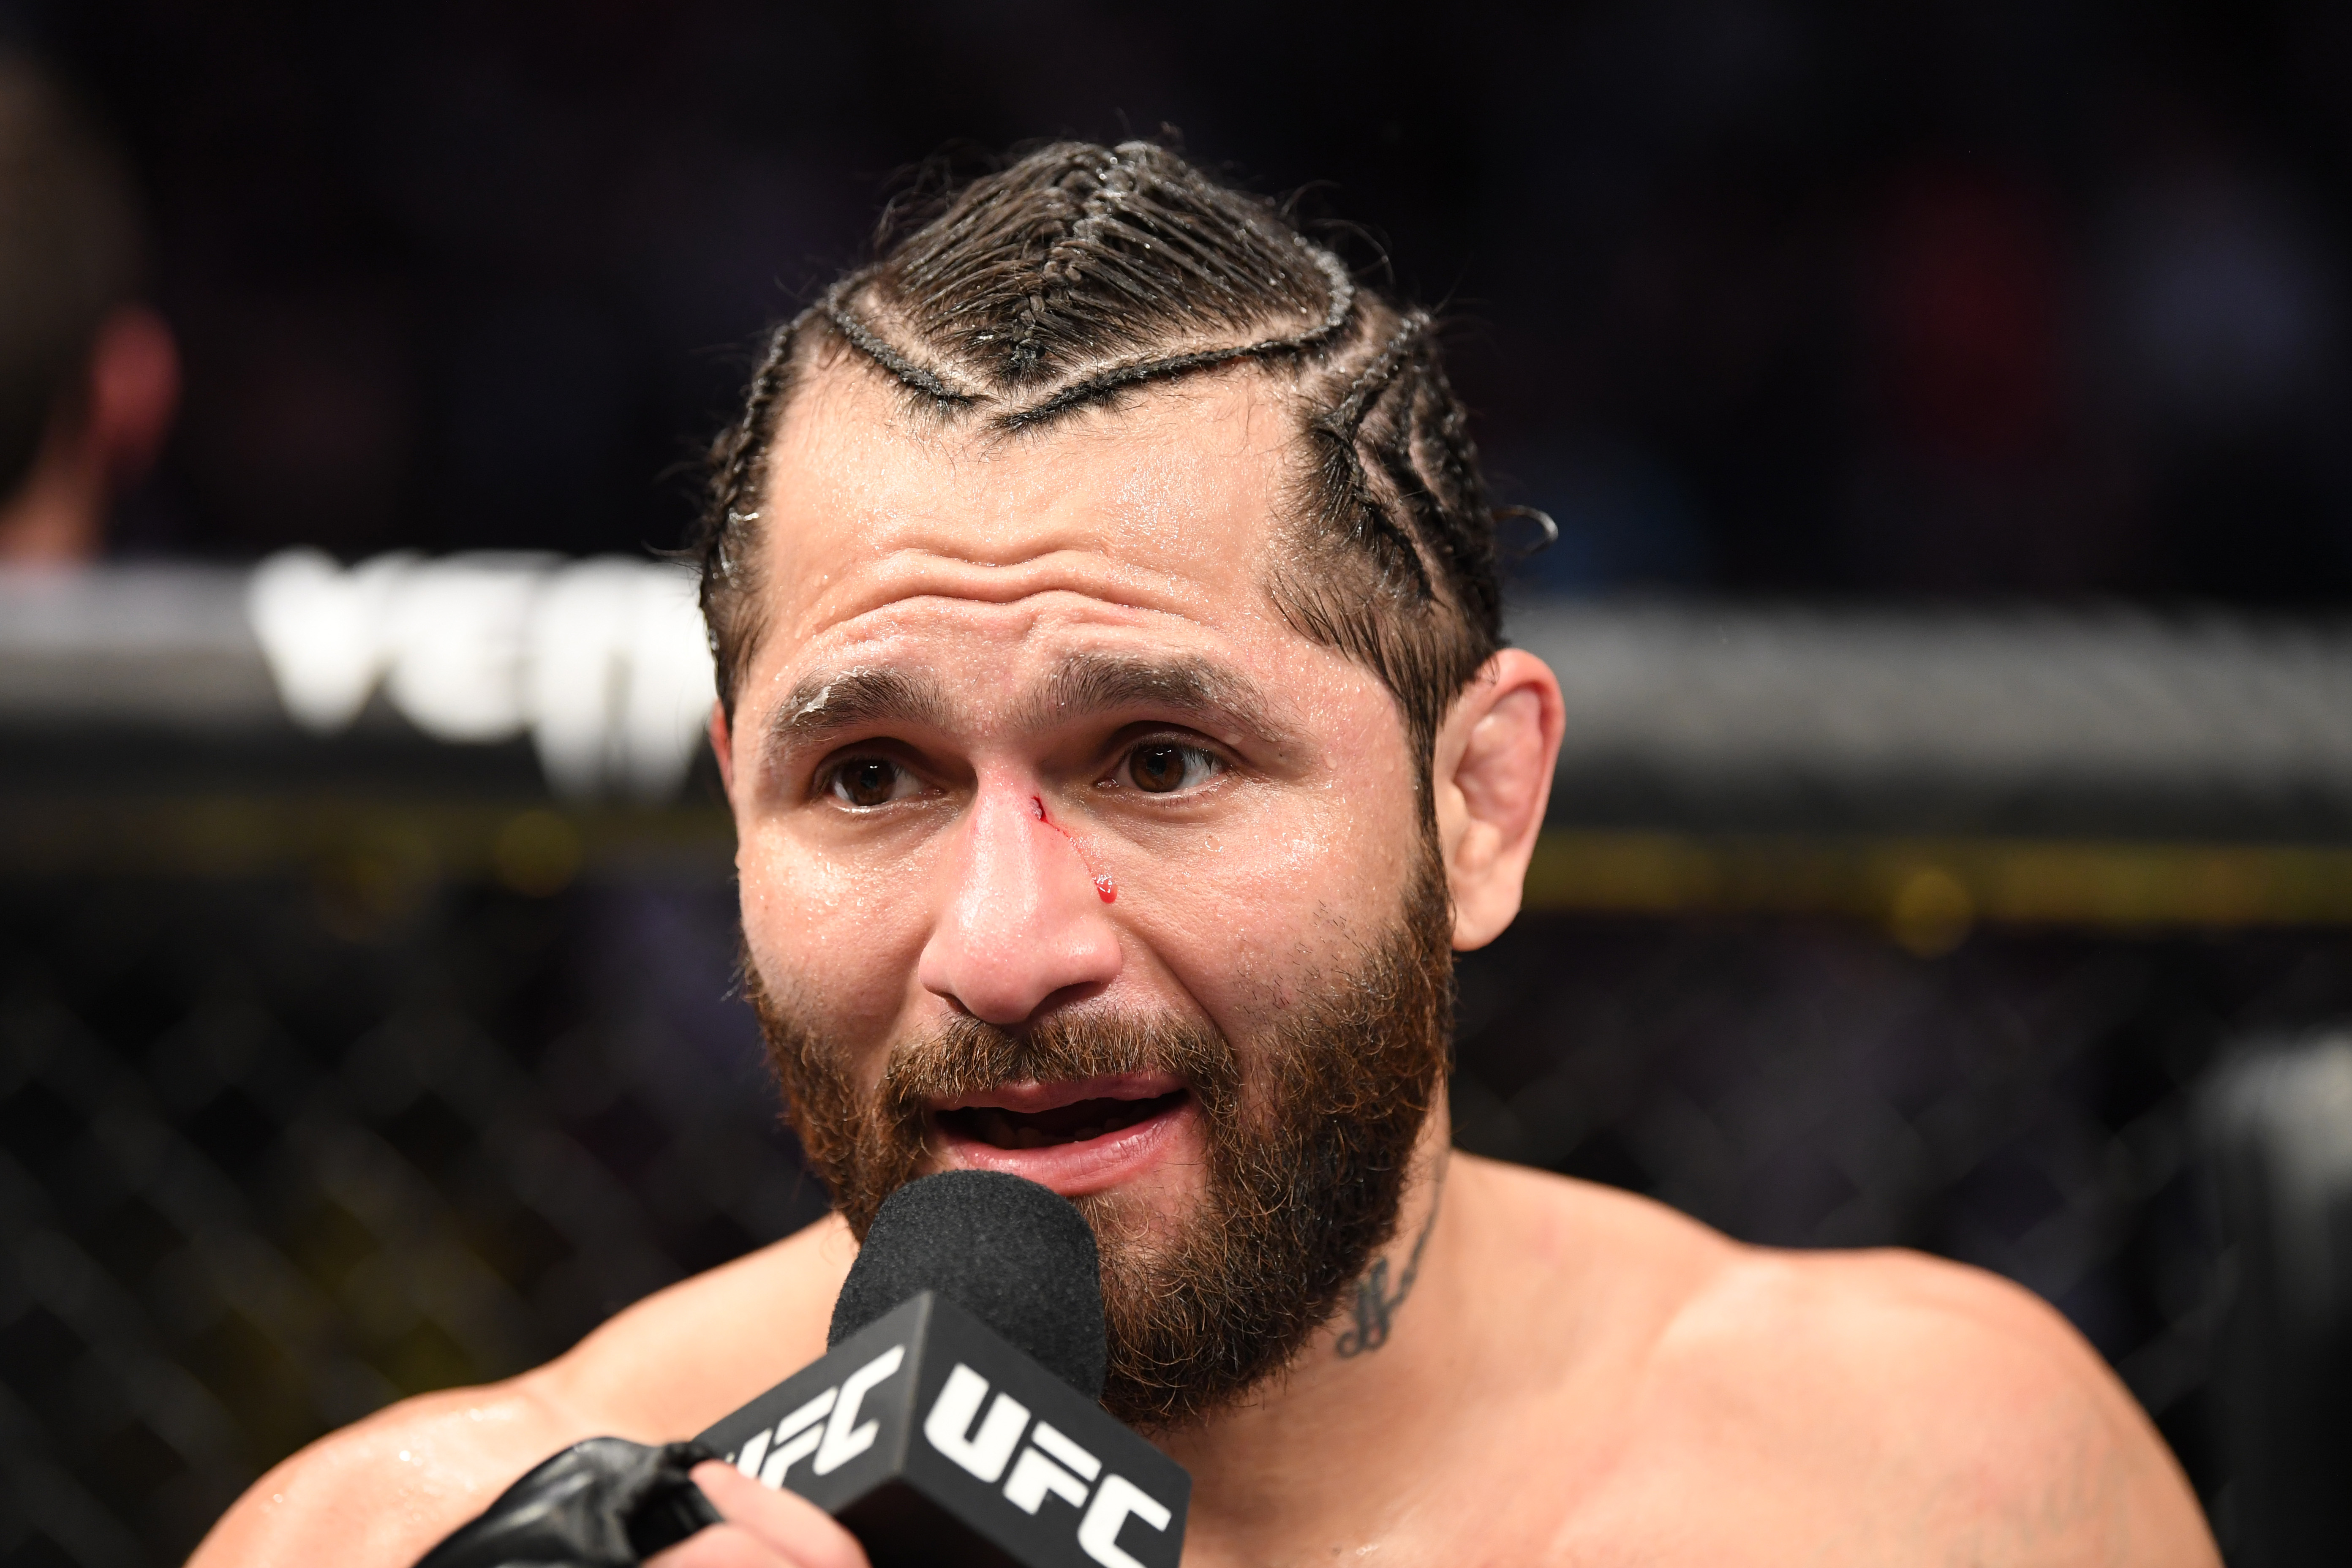 Jorge Masvidal gives a post-fight interview after losing to Kamaru Usman at UFC 261.